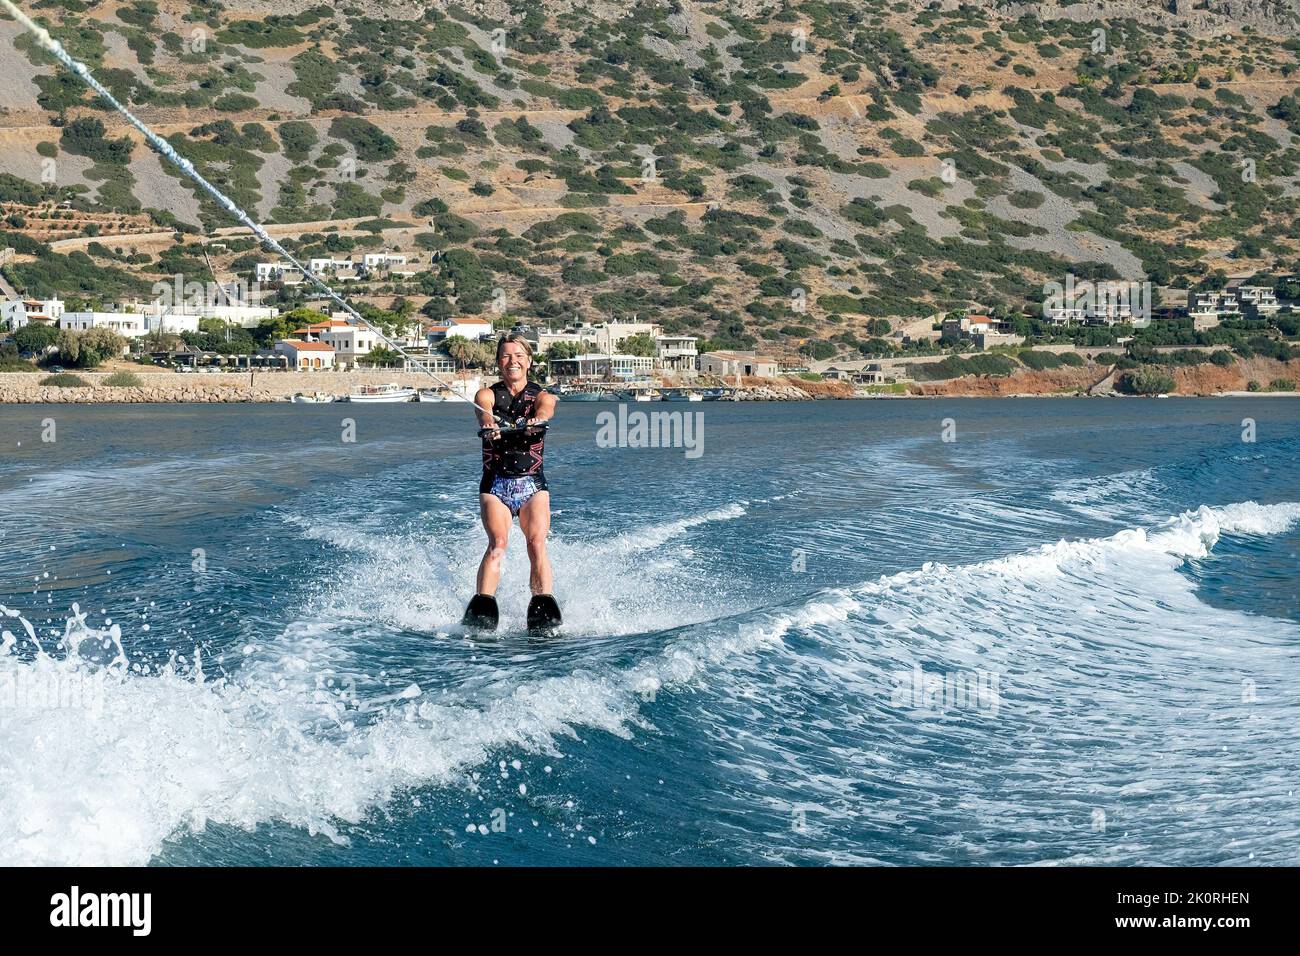 Holiday water skiing in Elounda Bay, Crete. A naturally sheltered scenic bay that provides an ideal waterskiing location. Stock Photo